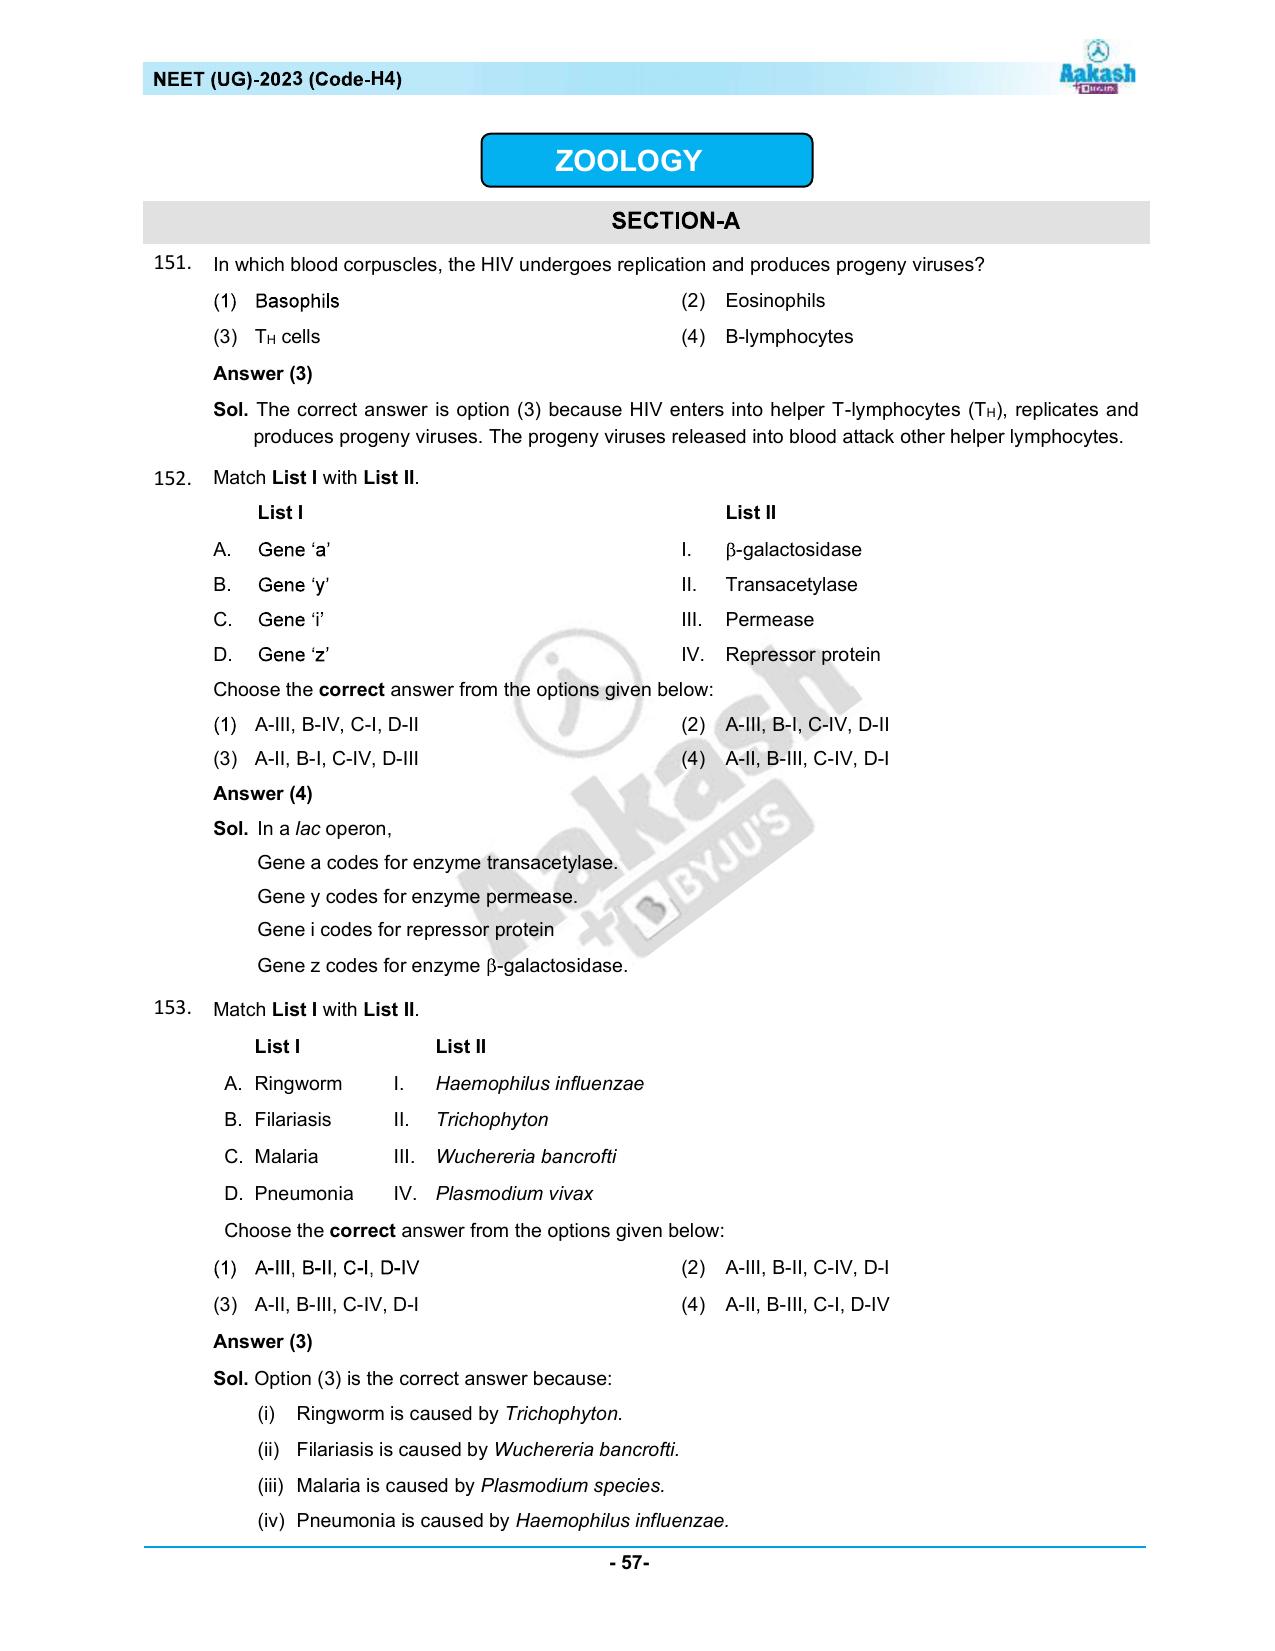 NEET 2023 Question Paper H4 - Page 57